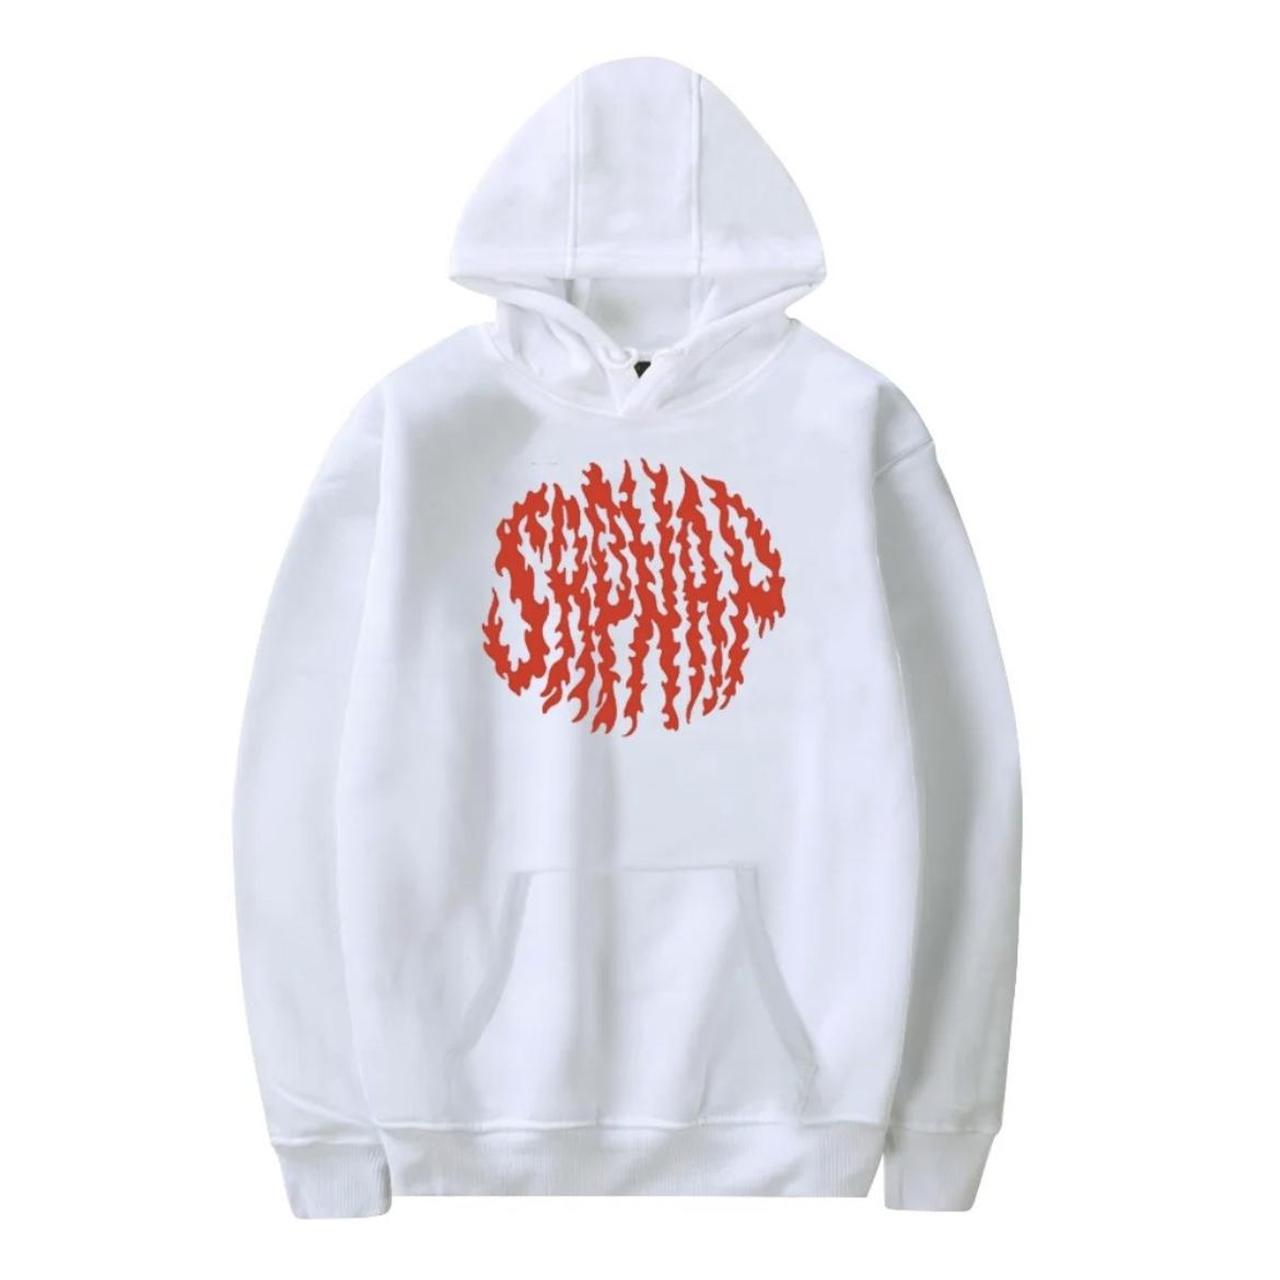 Limited edition Sapnap white flame name over hoodie. - Depop